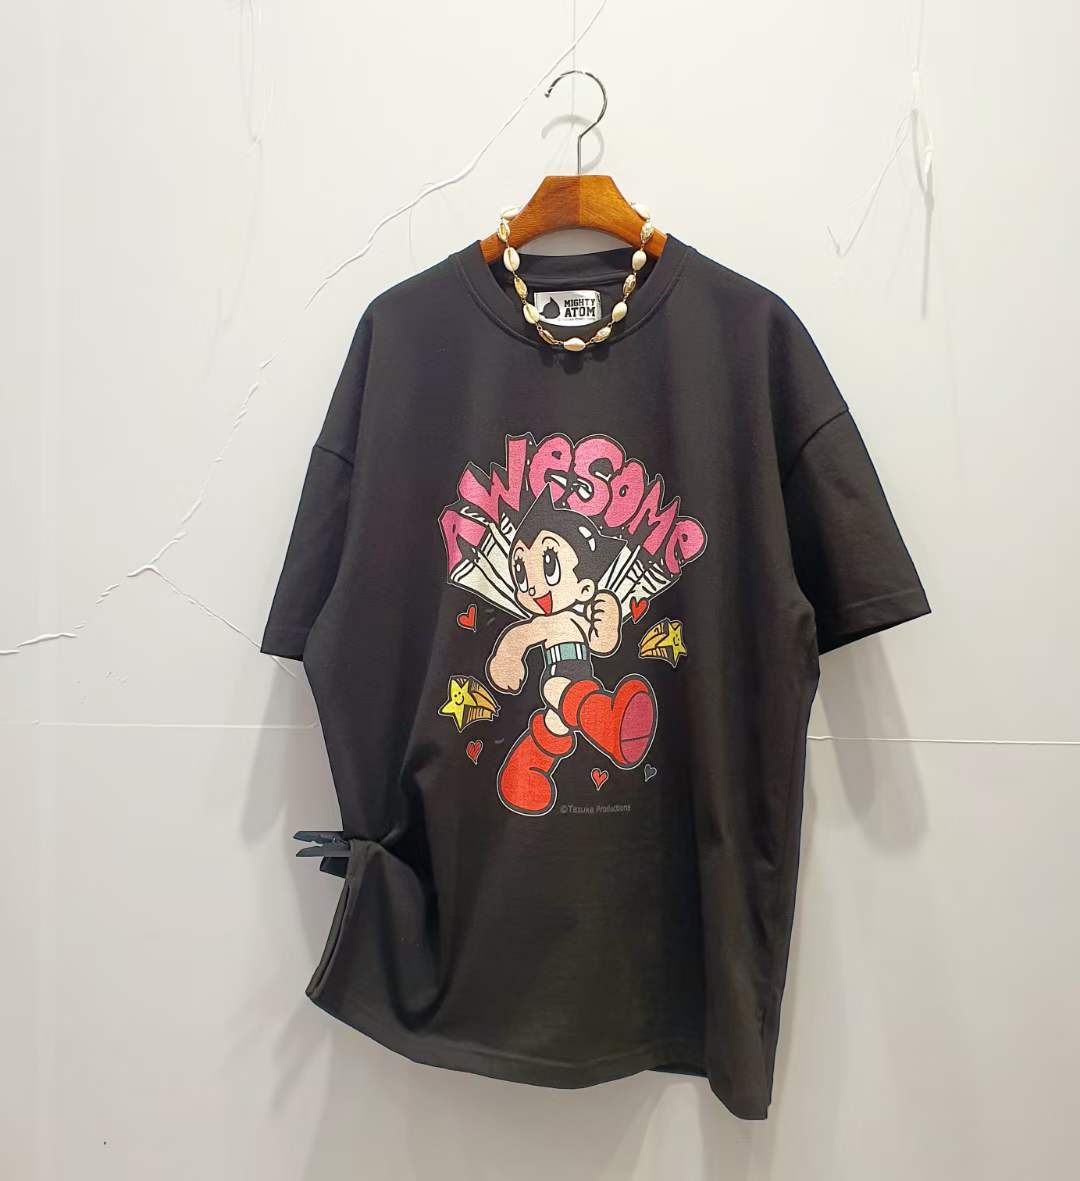 Awesome Astro Boy T-shirt